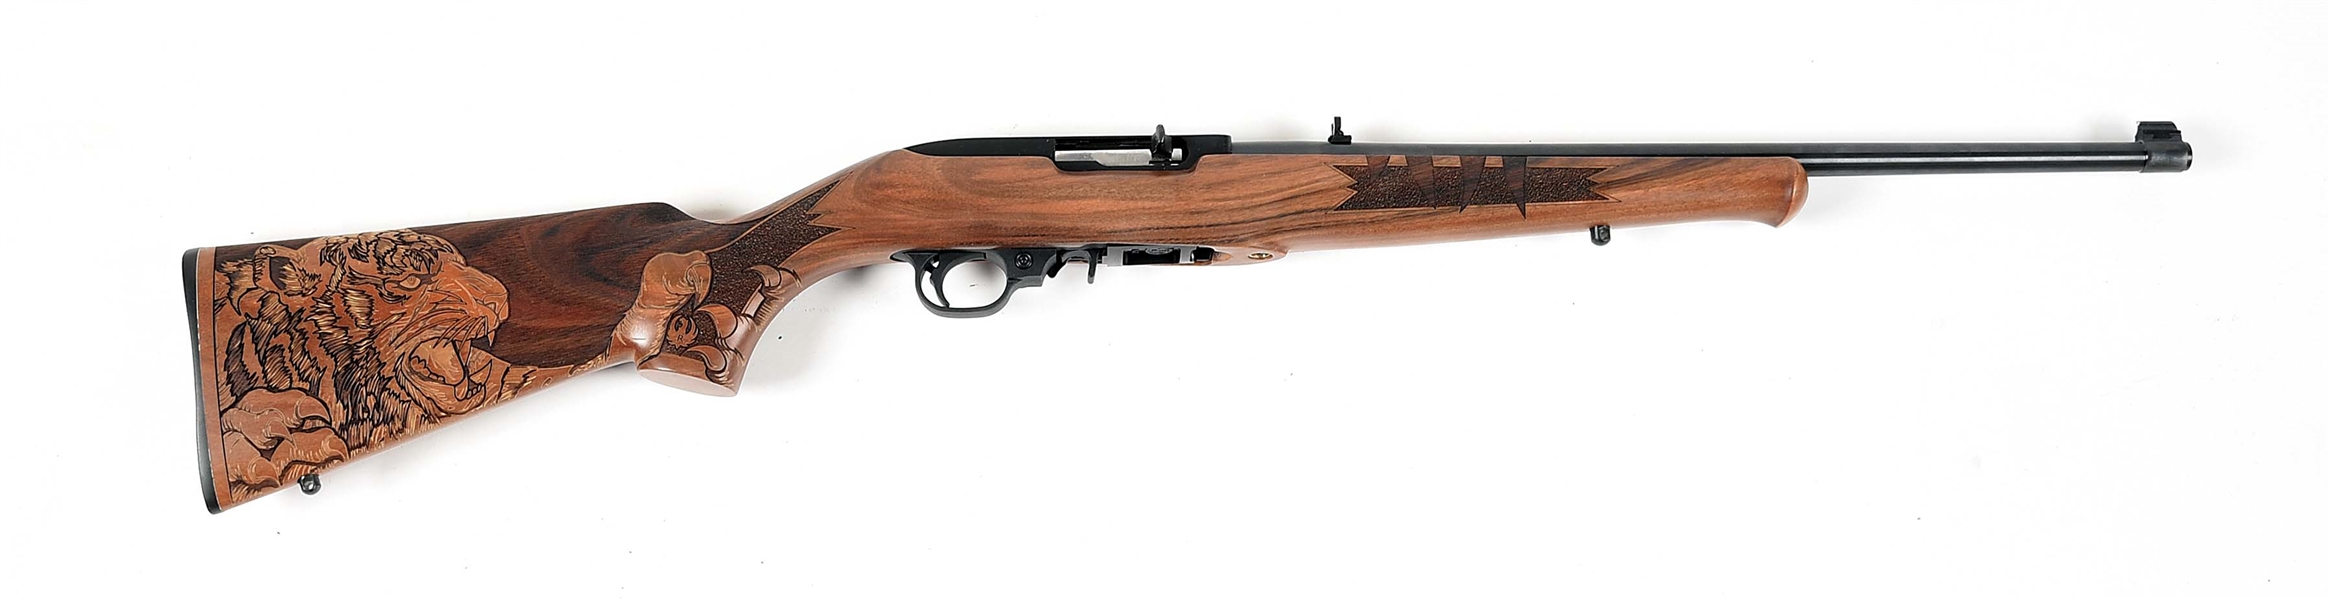 (M) TALO TIGER LIMITED EDITION RUGER 10/22 SEMI AUTOMATIC RIFLE.